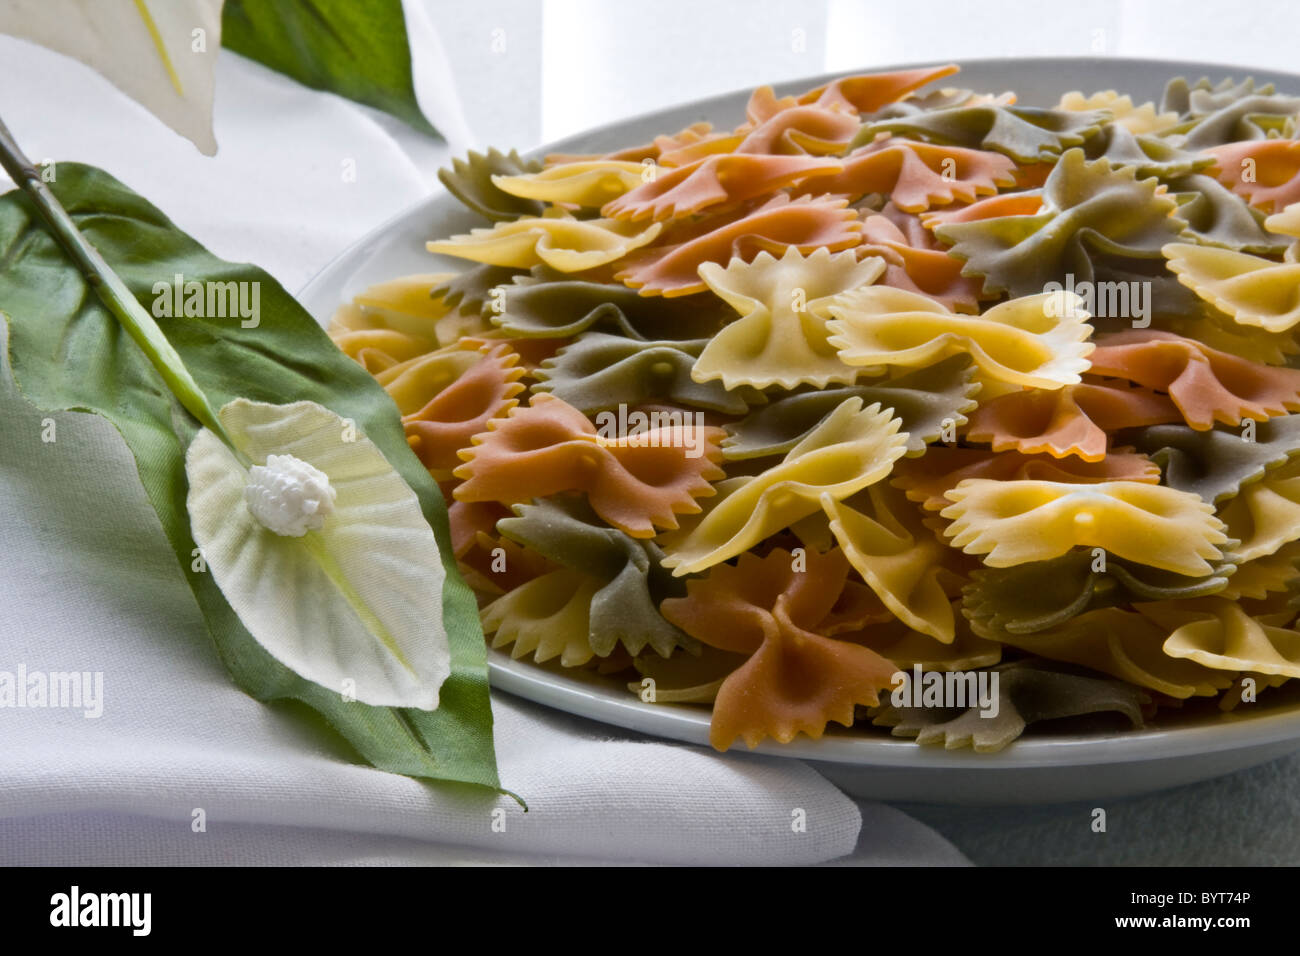 Tricolor farfalle pasta uncooked with flower, bowl and napkin Stock Photo